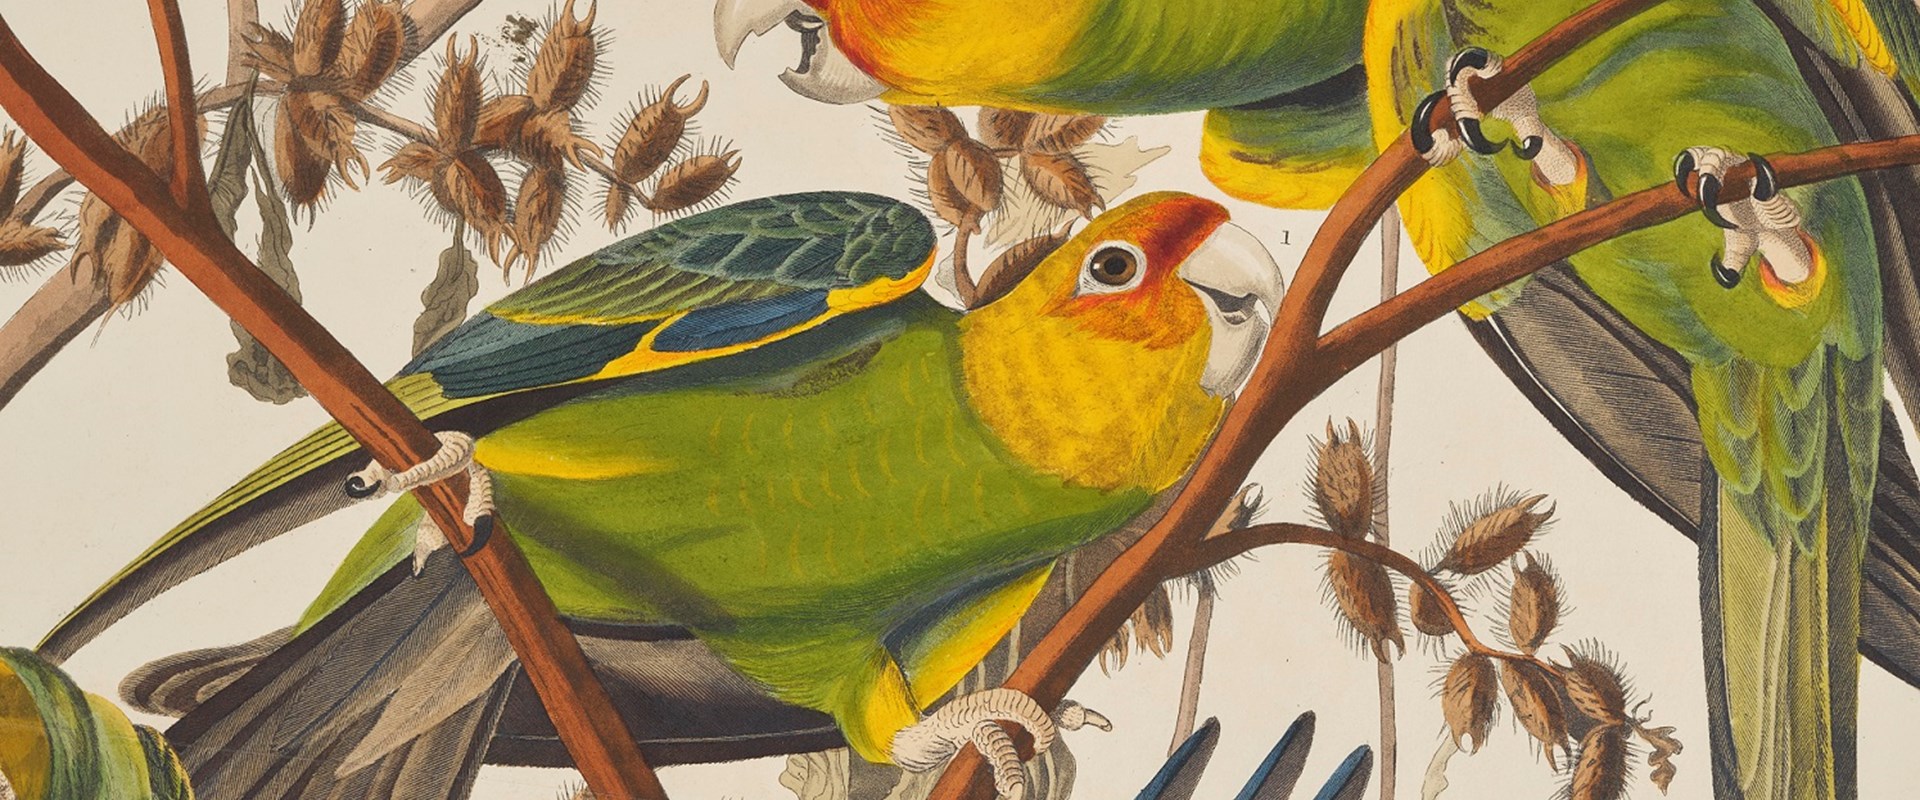 Detail From A Print Depicting Carolina Parrots From Birds Of America, By John James Audubon. Image © National Museums Scotland